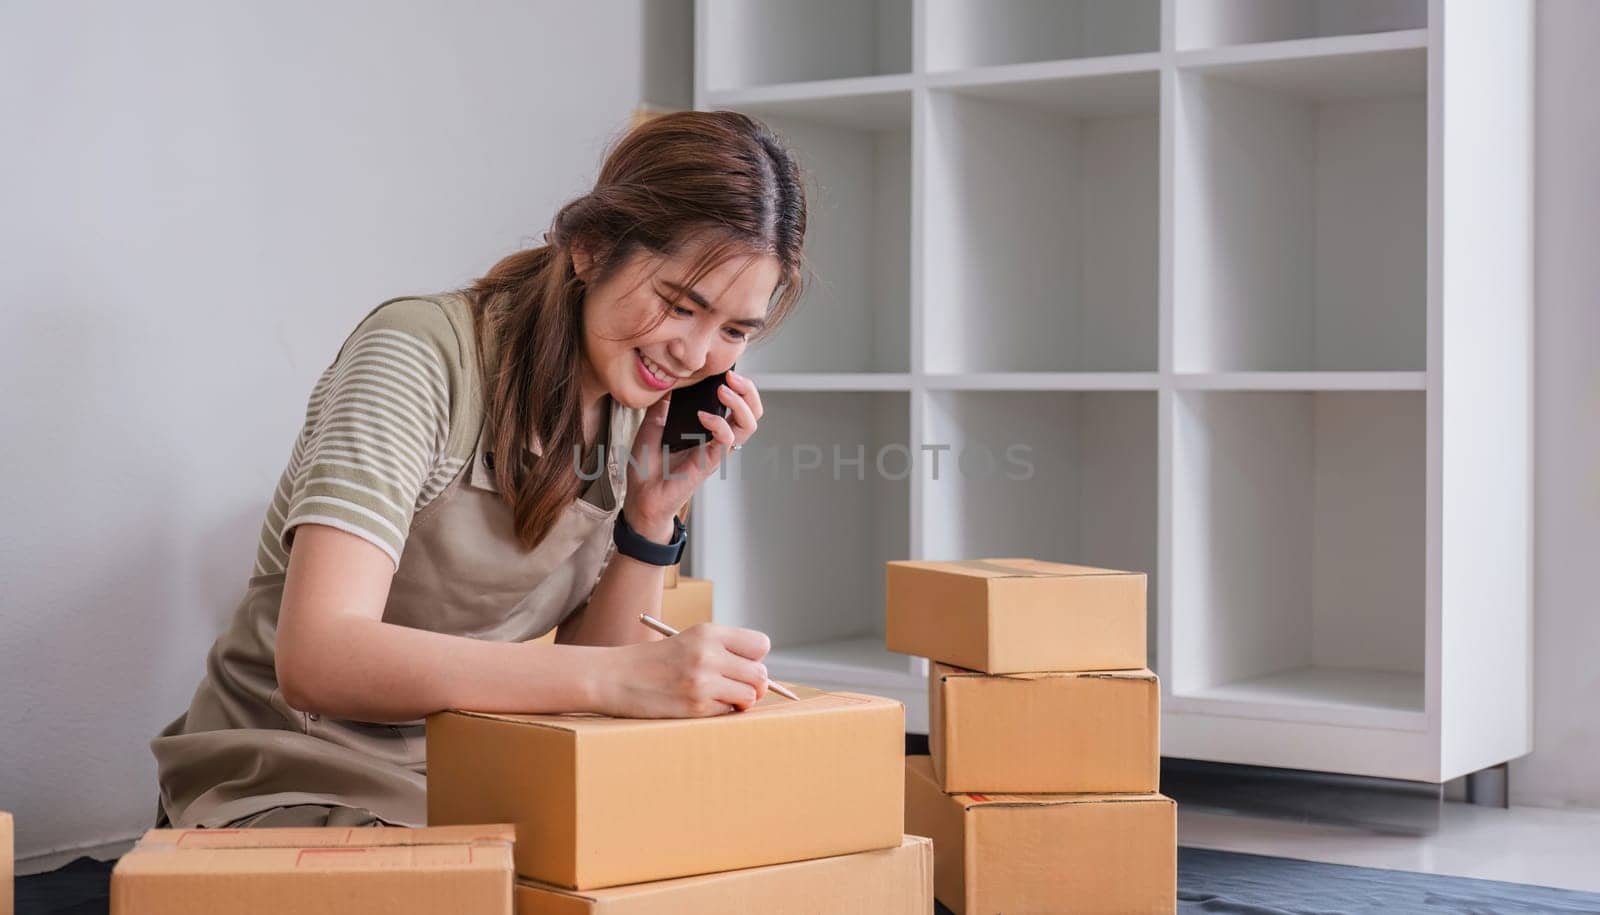 Small business entrepreneur SME freelance woman using phone call receive from customer checking product on stock at home office, online marketing packaging delivery box, SME e-commerce concept..